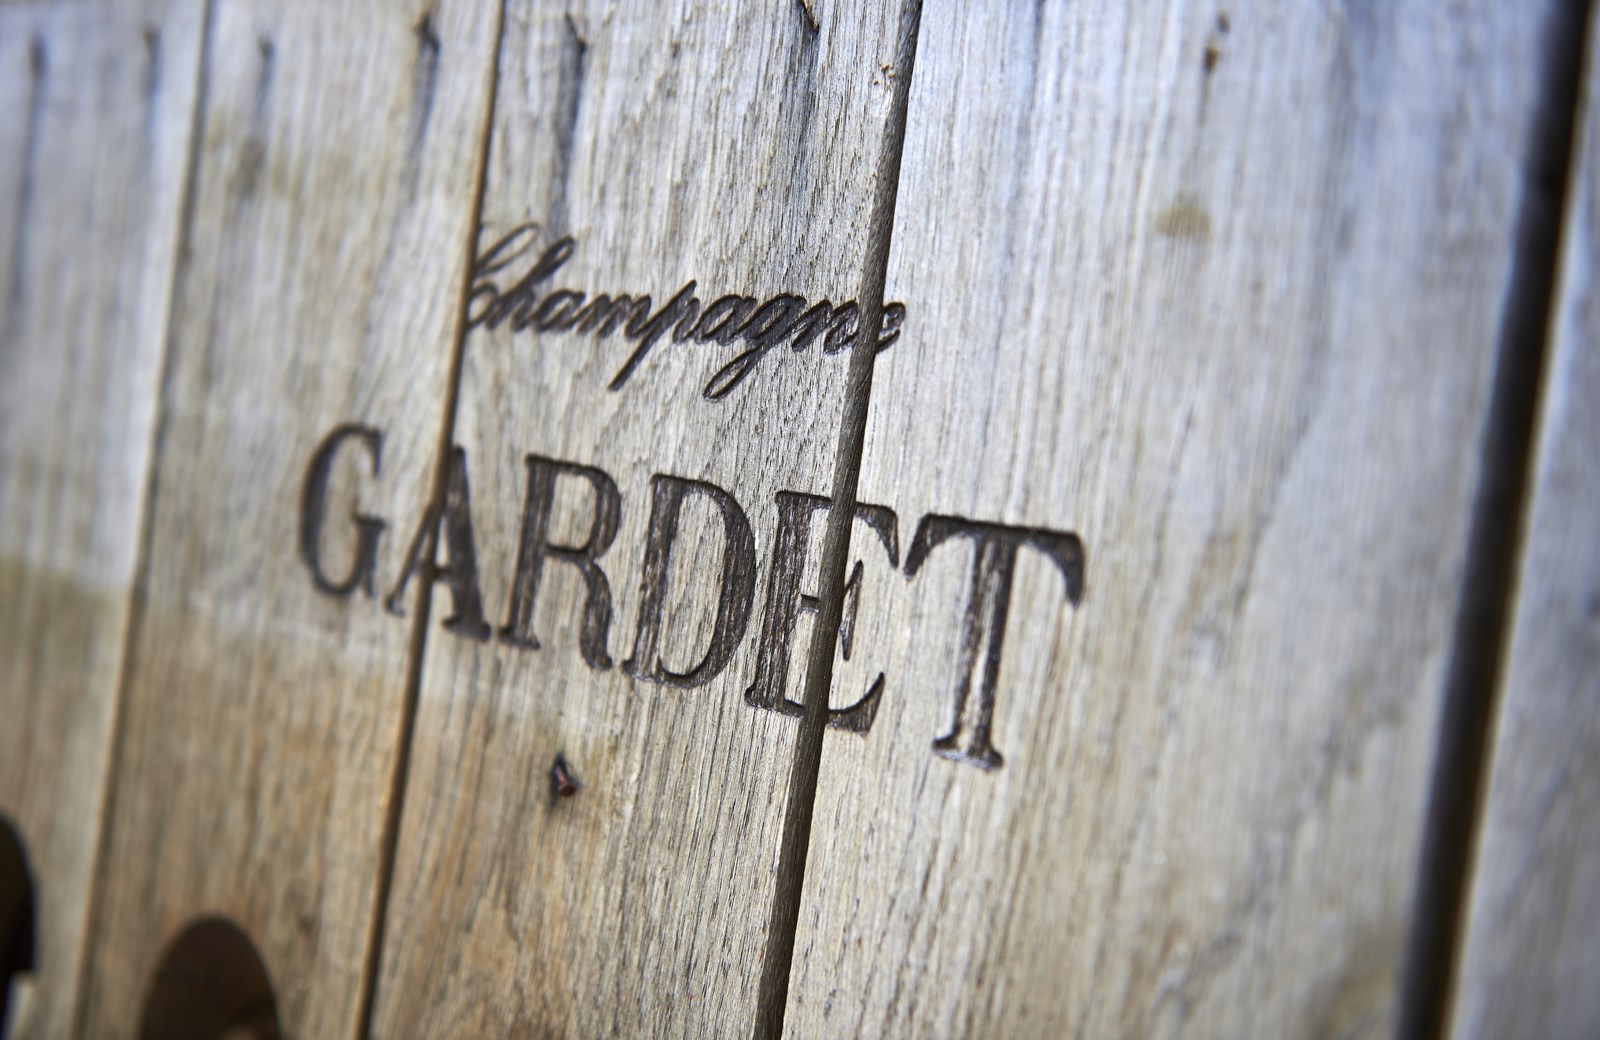 November Producer of the Month: Champagne Gardet